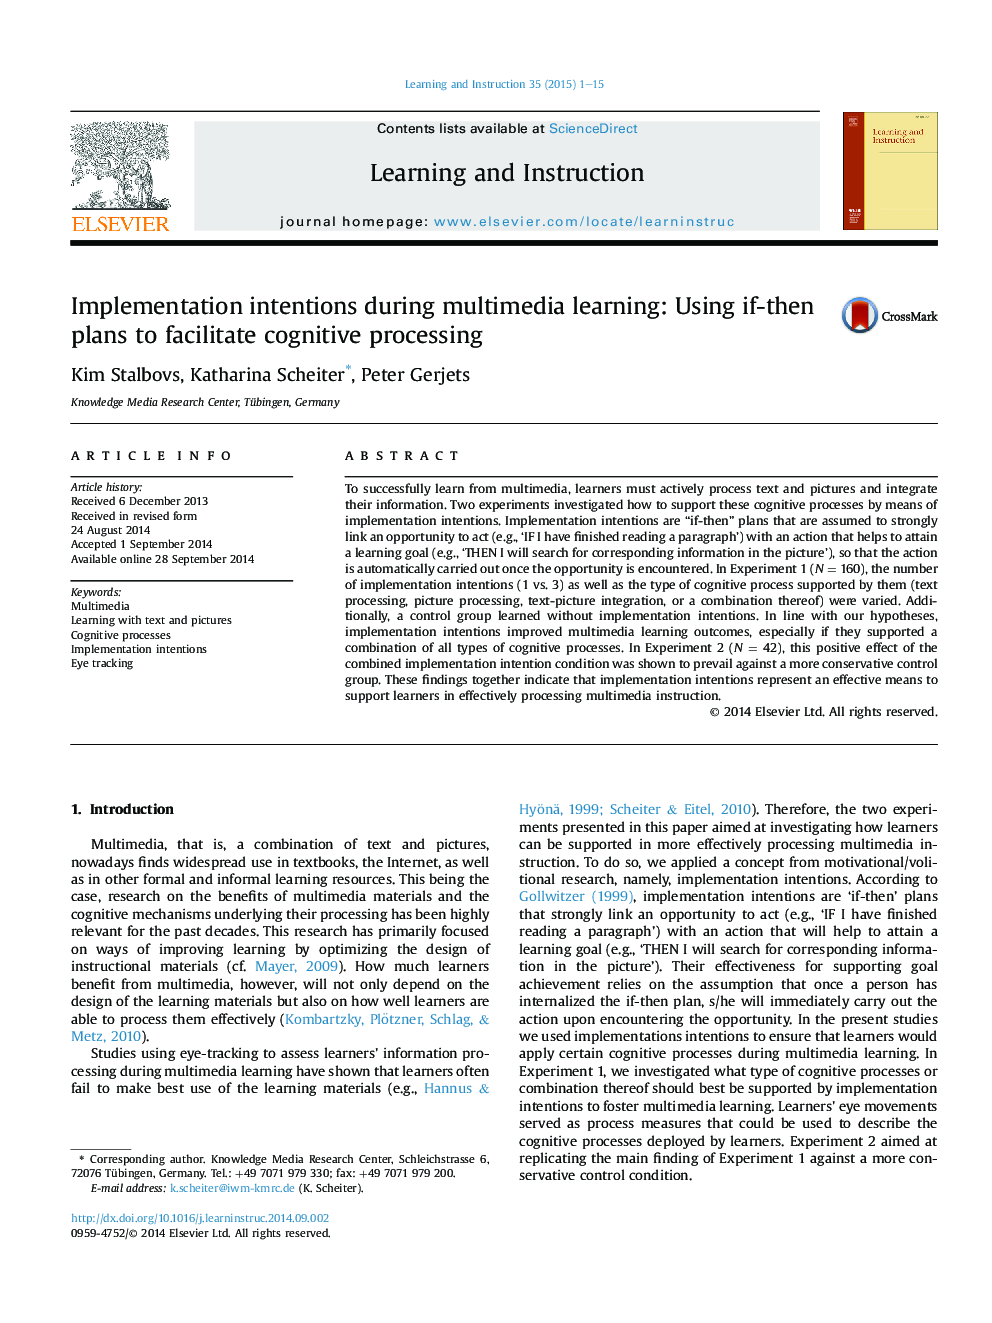 Implementation intentions during multimedia learning: Using if-then plans to facilitate cognitive processing